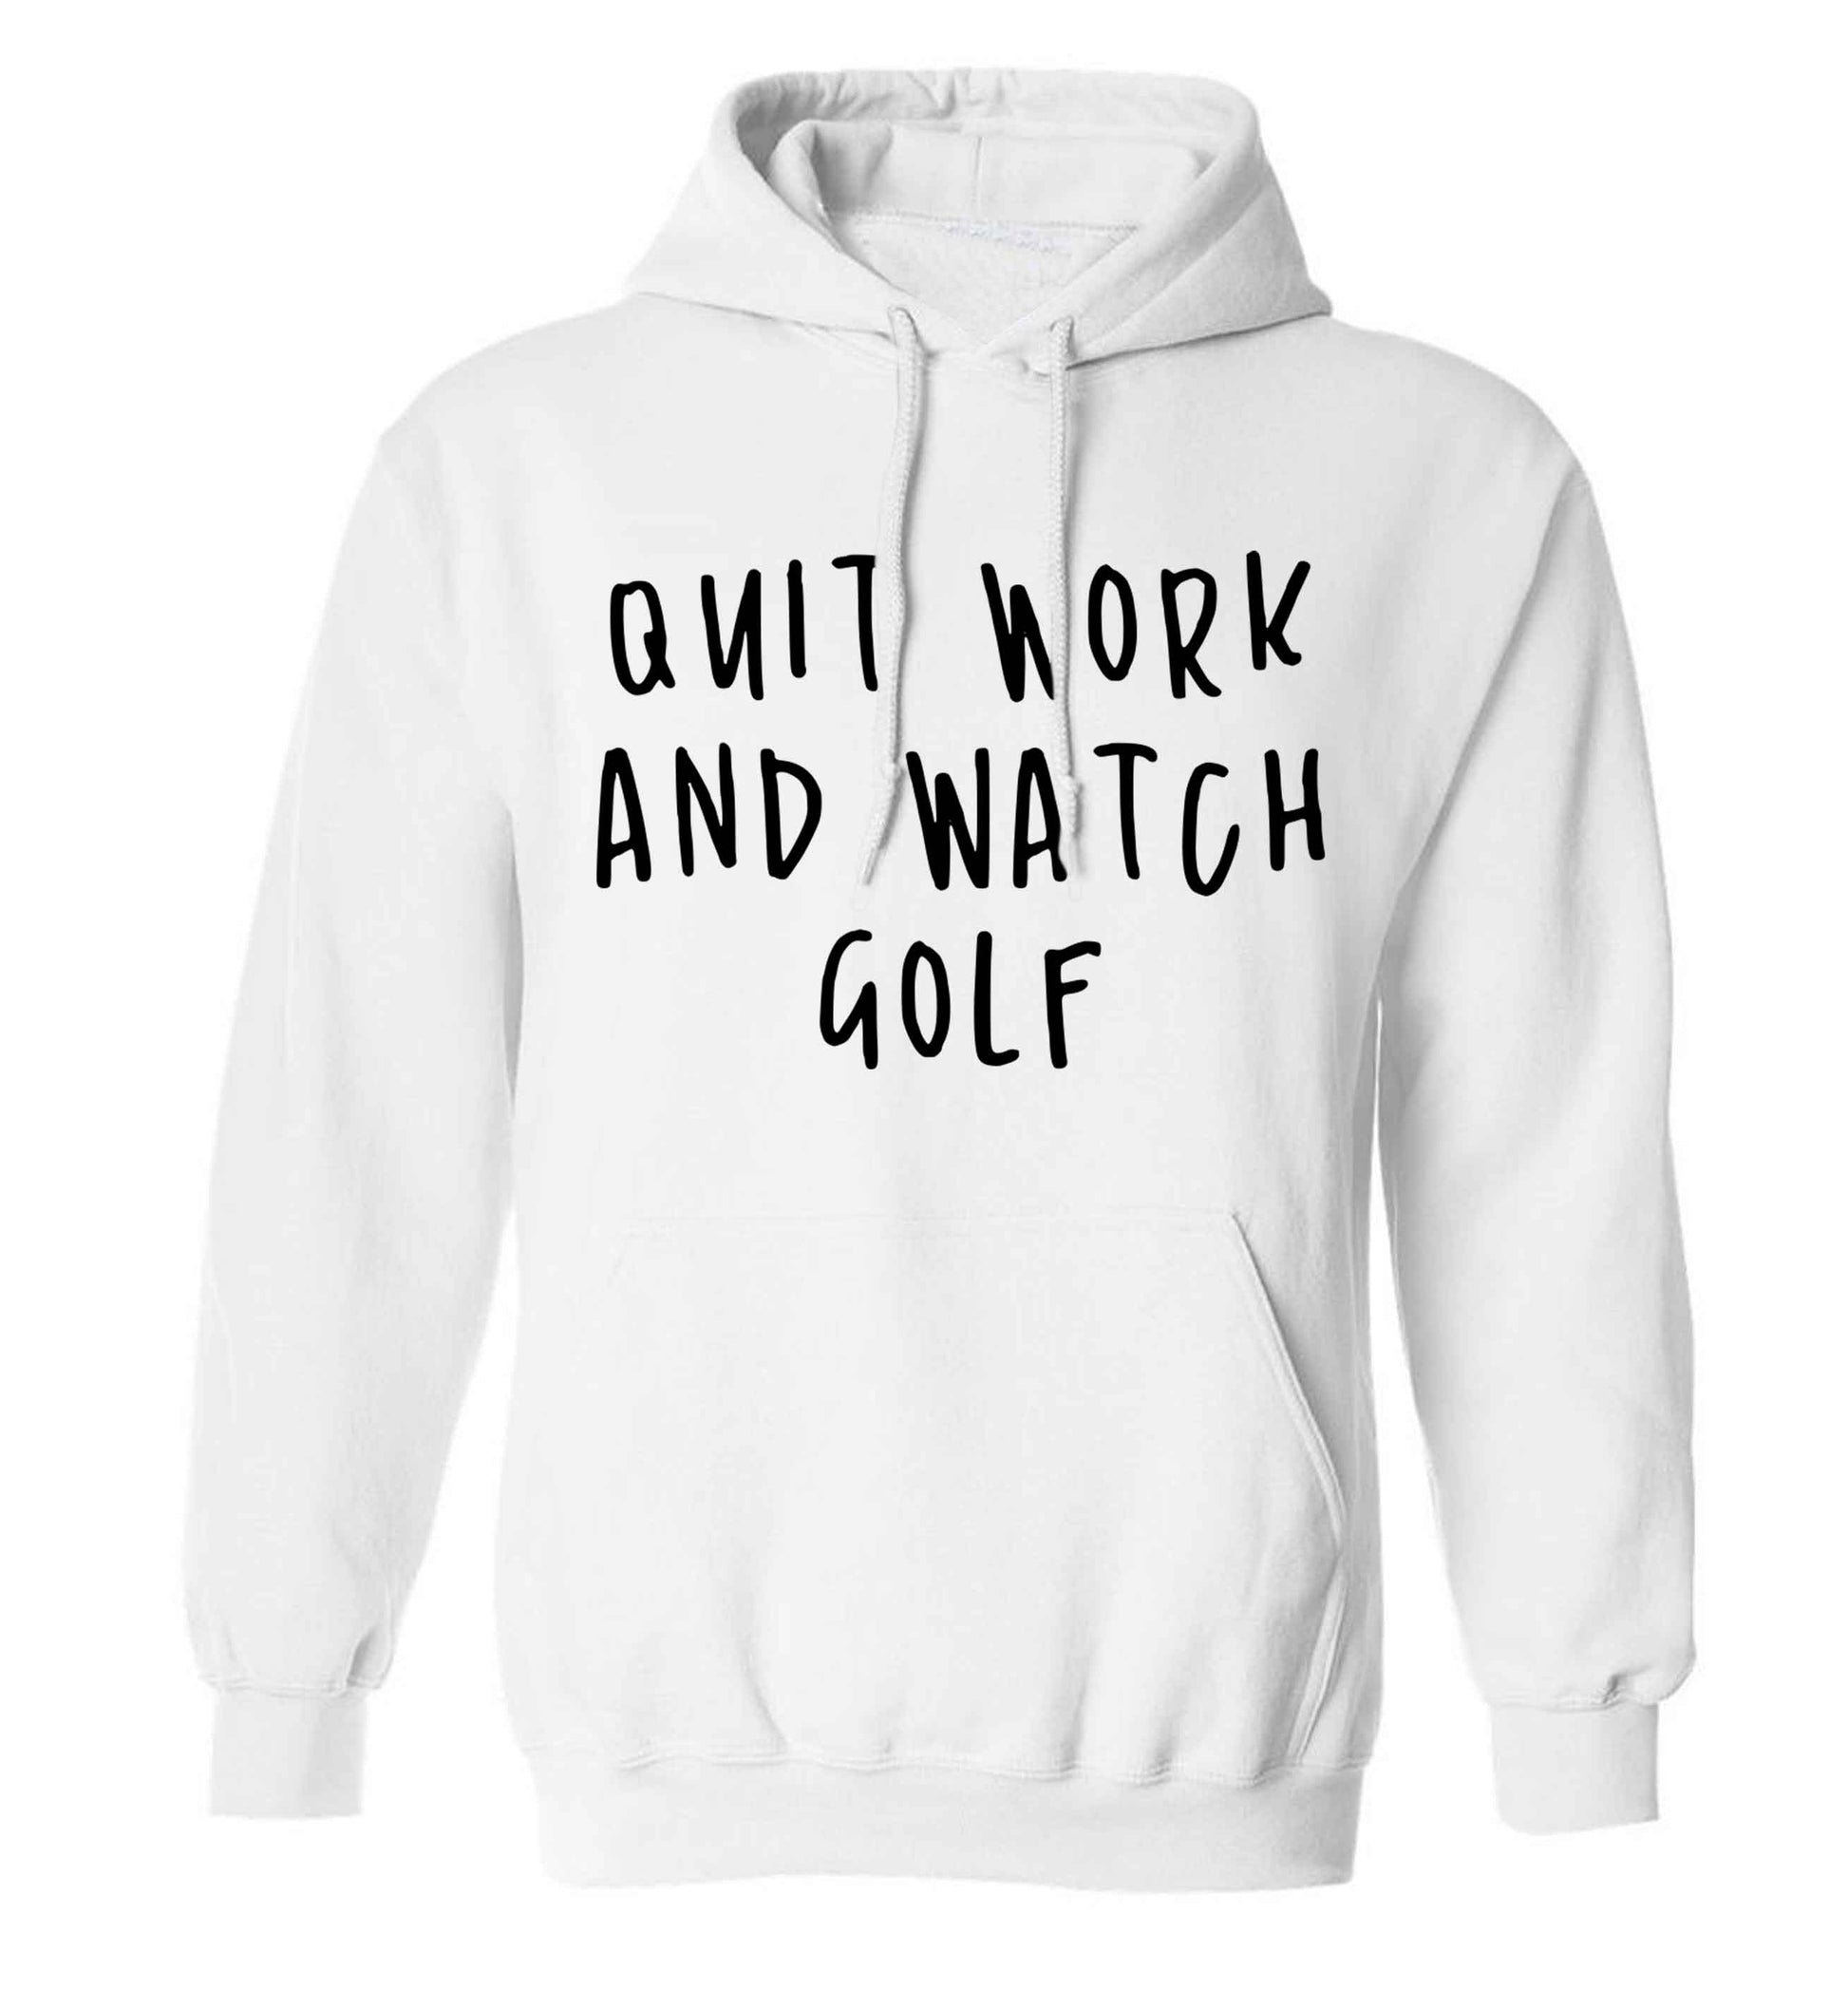 Quit work and watch golf adults unisex white hoodie 2XL